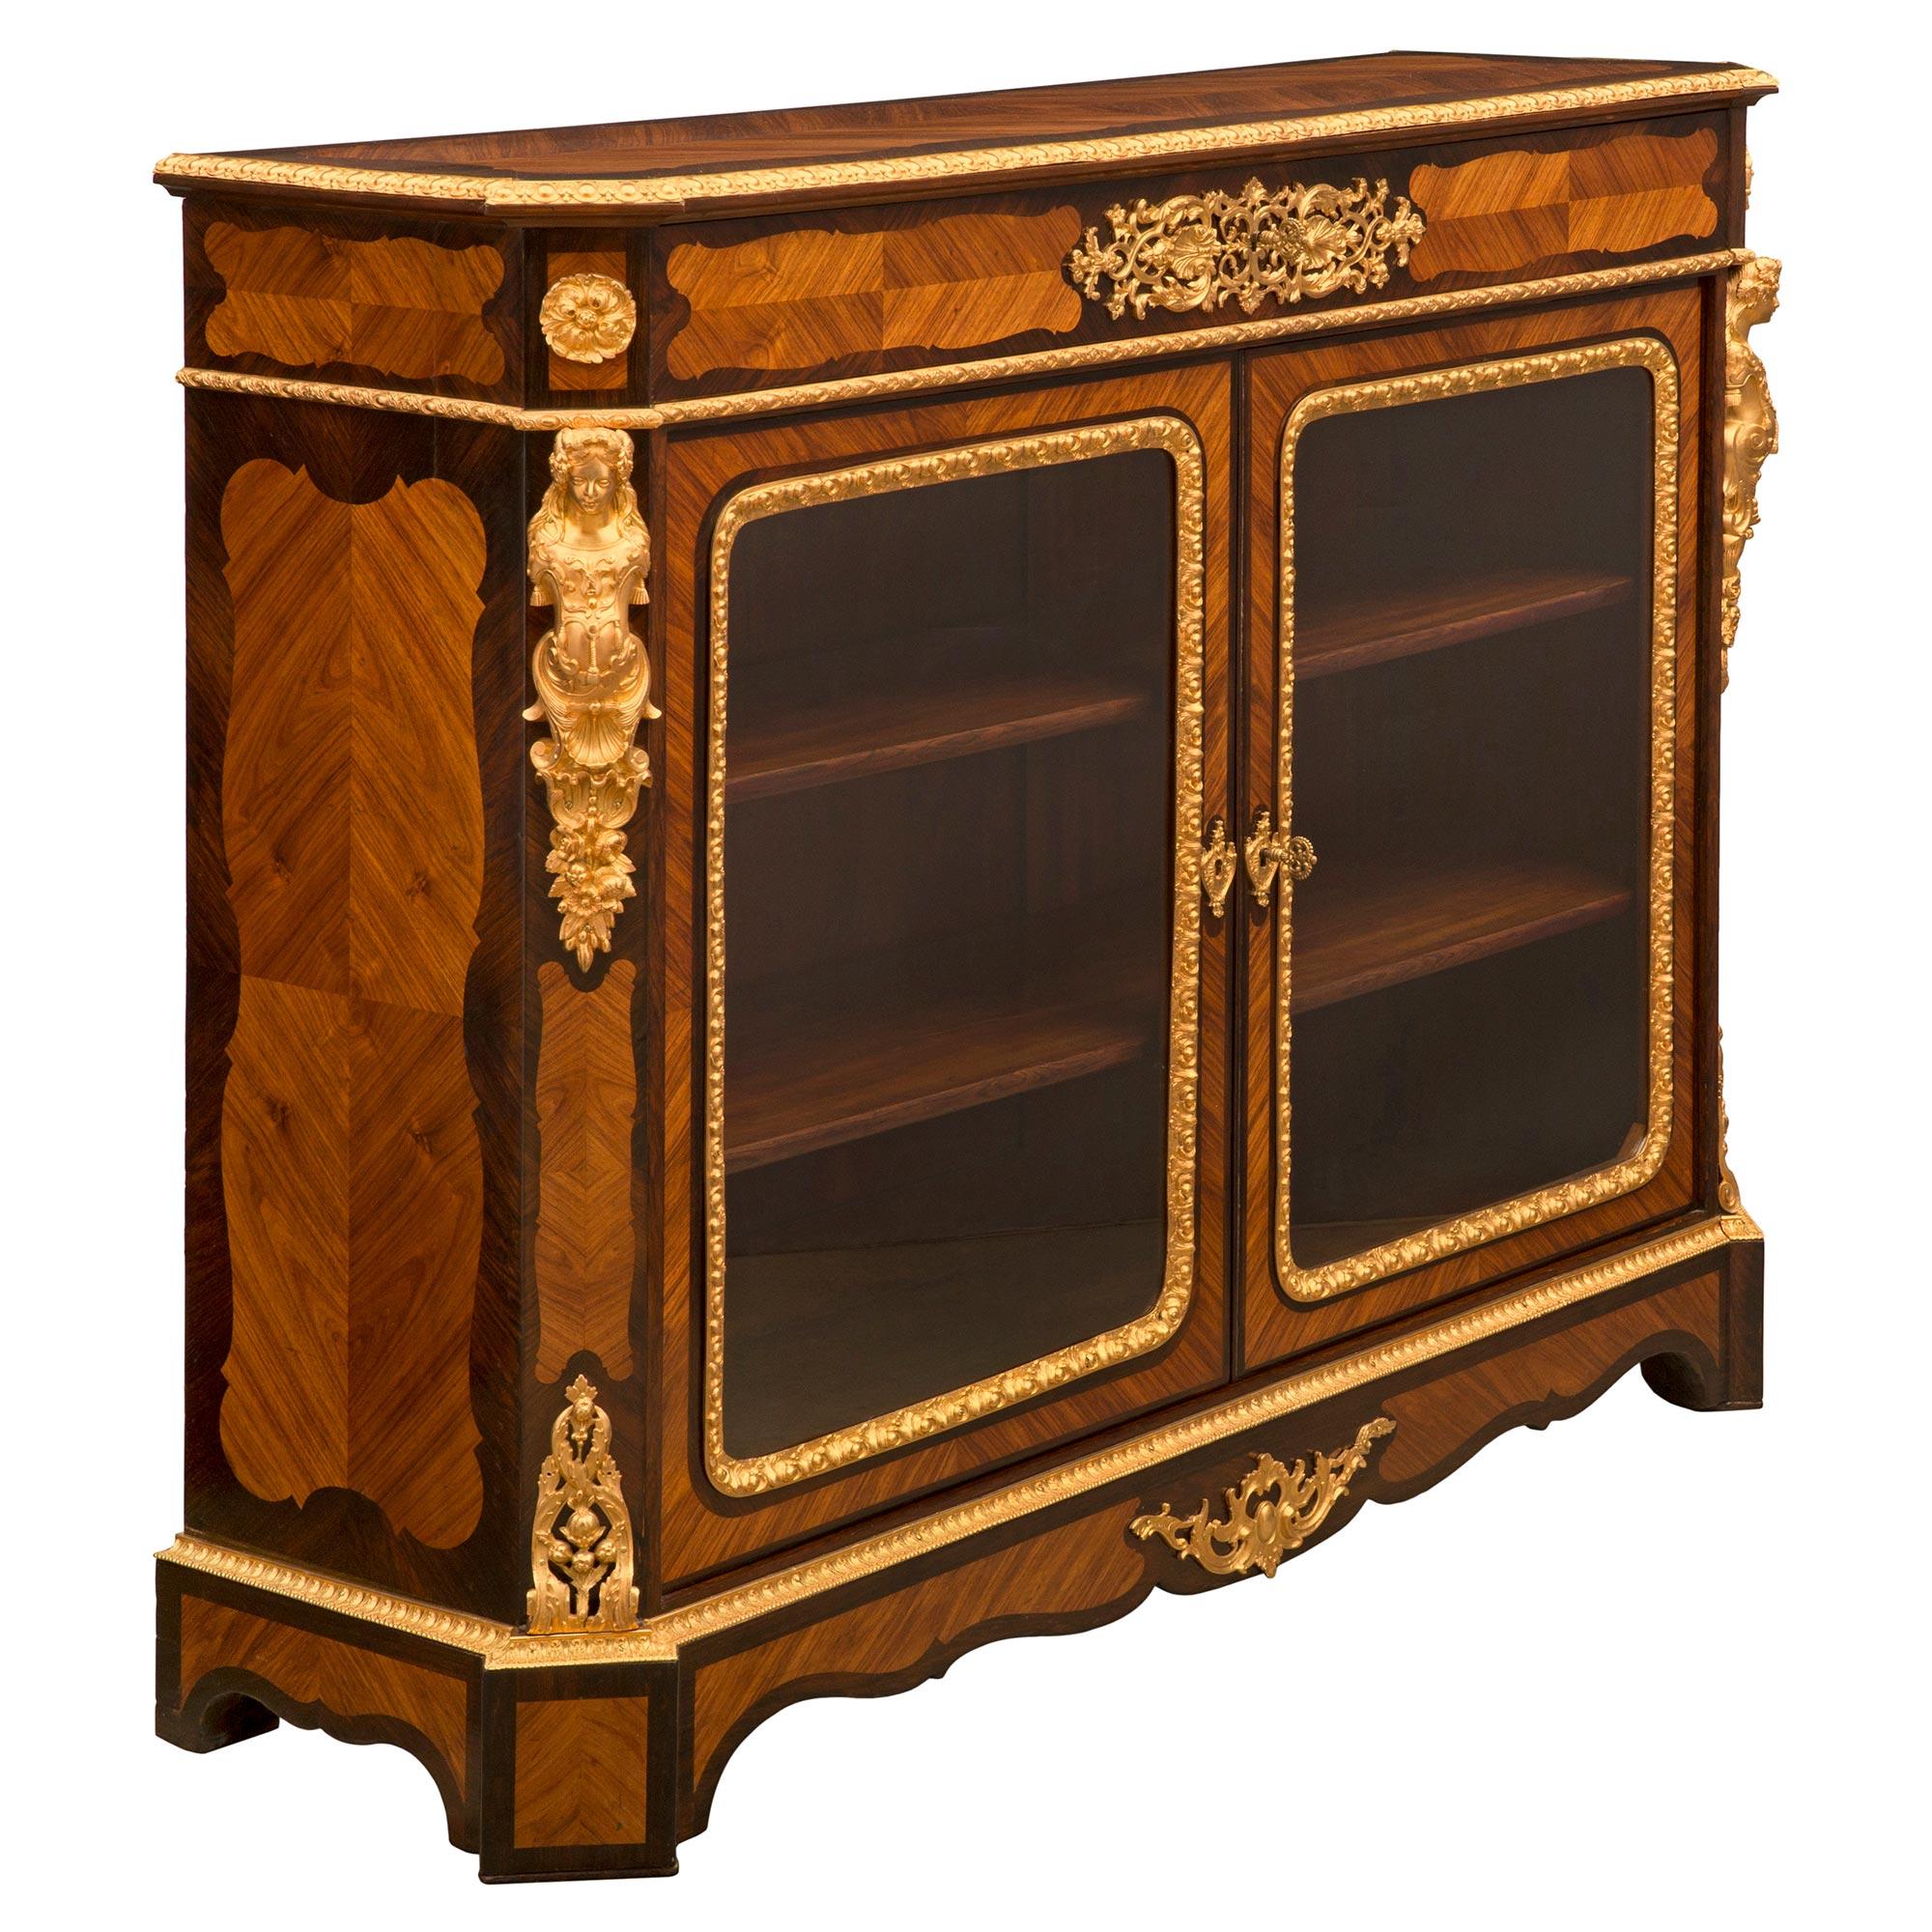 French 19th Century Napoleon III Tulipwood and Ormolu Vitrine In Good Condition For Sale In West Palm Beach, FL